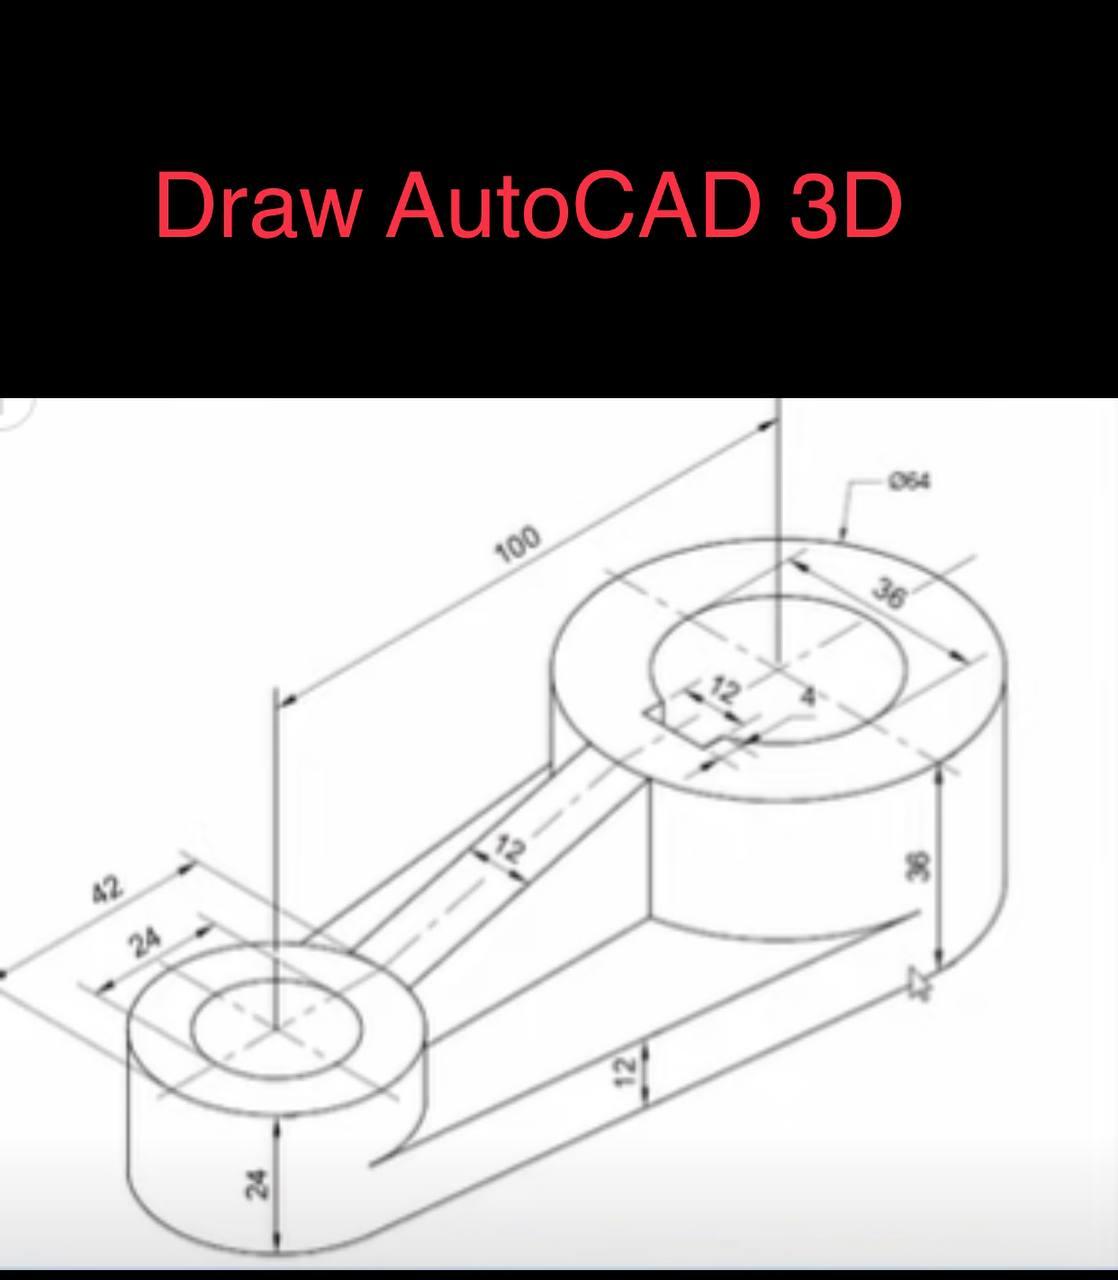 How would you do this 3d piece on Autocad? - Quora